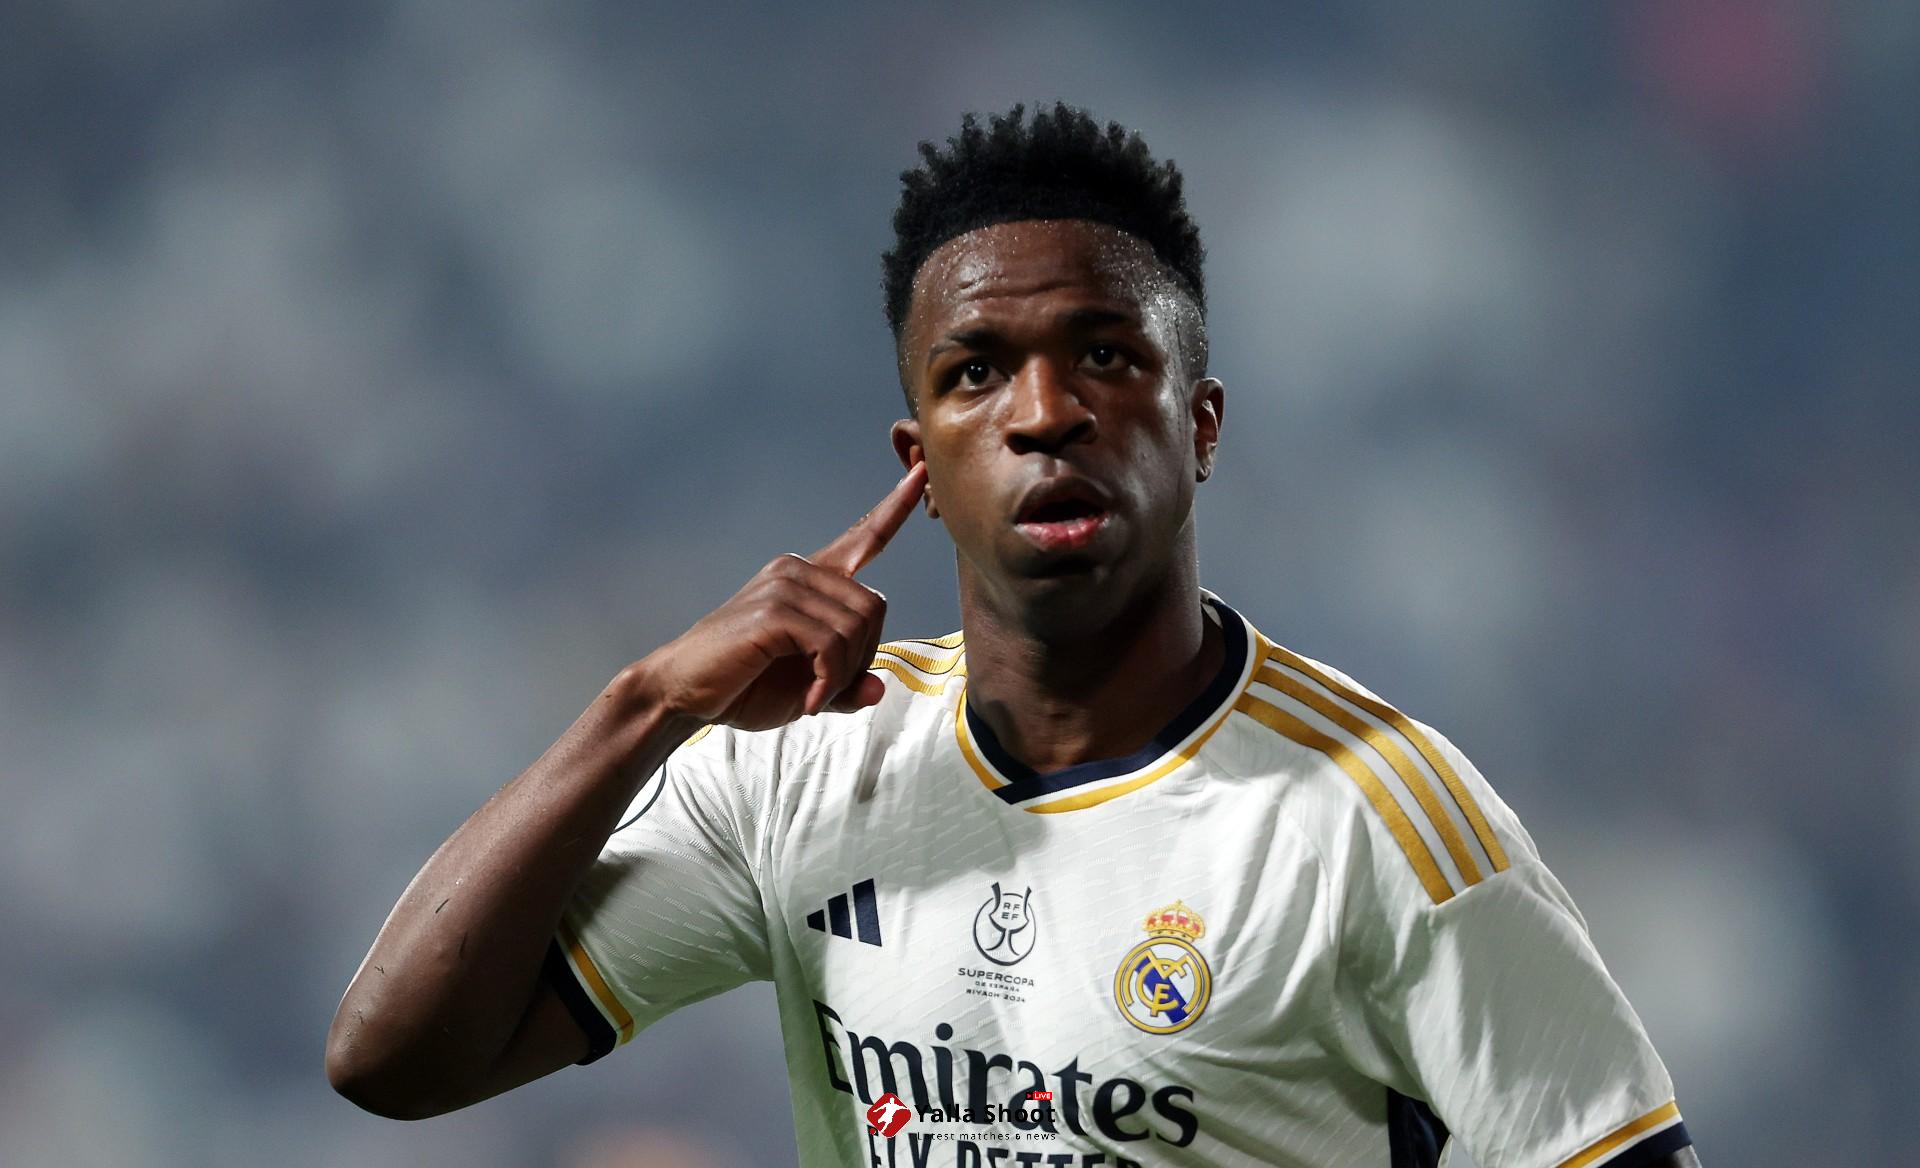 WATCH: Vinicius Jr double gives Real Madrid Spanish Supercopa lead over Barcelona